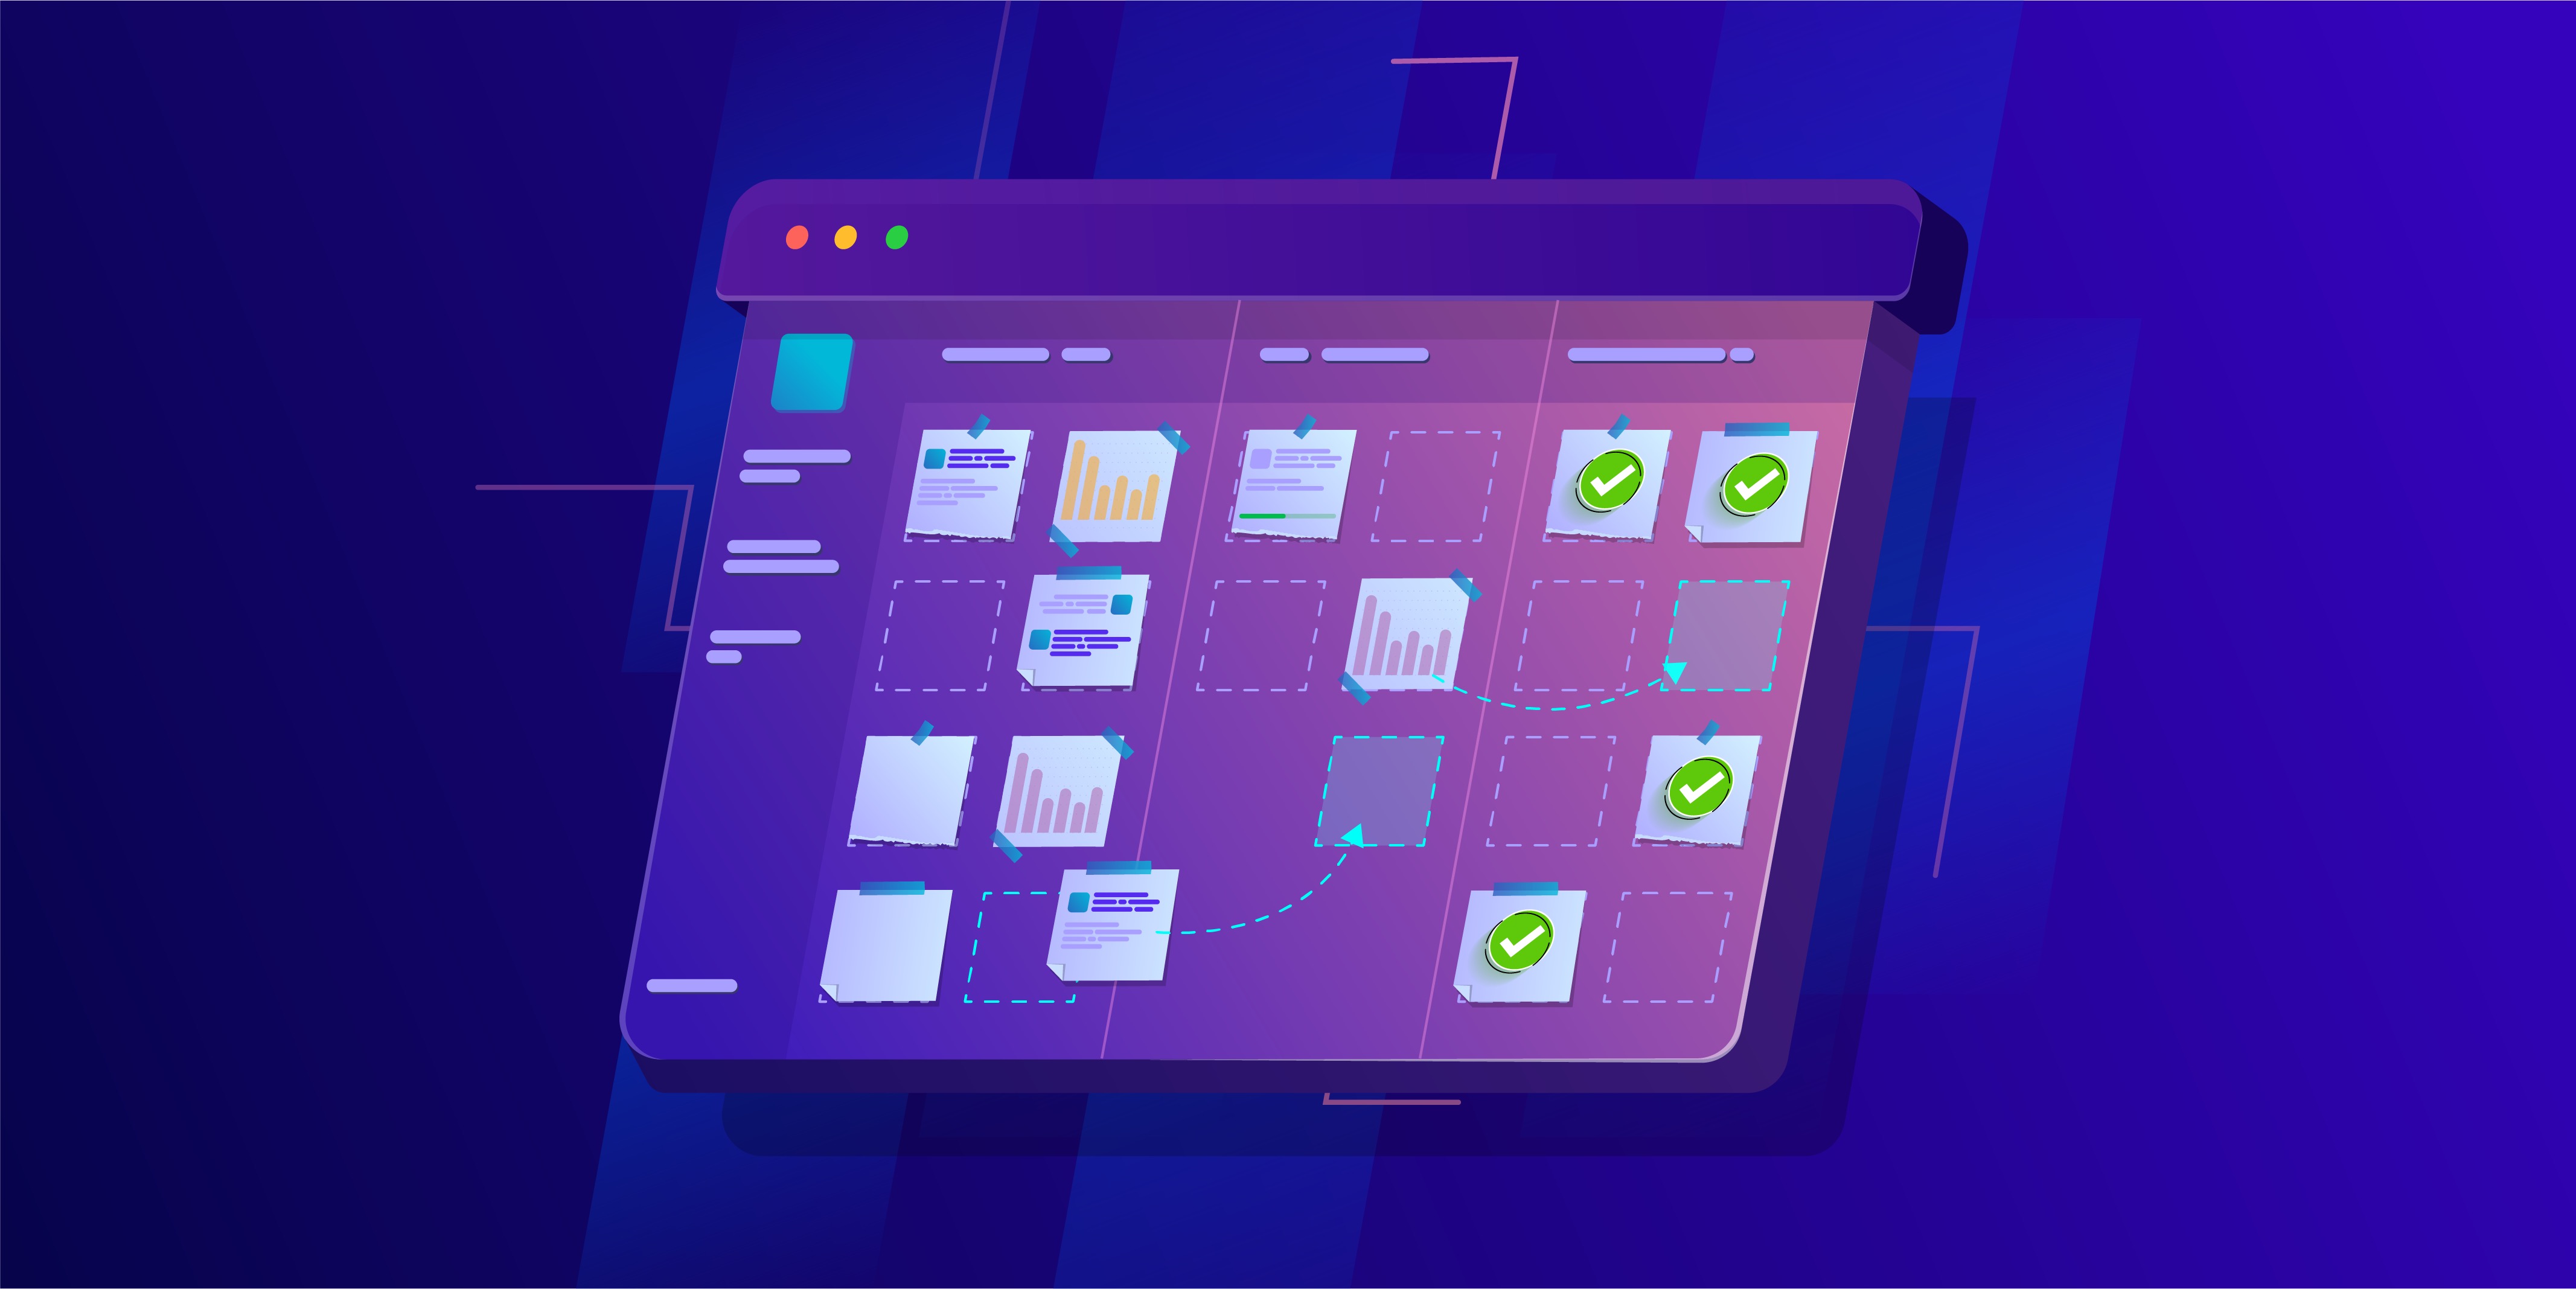 Build a Drag-and-Drop Trello Board with Vue.js